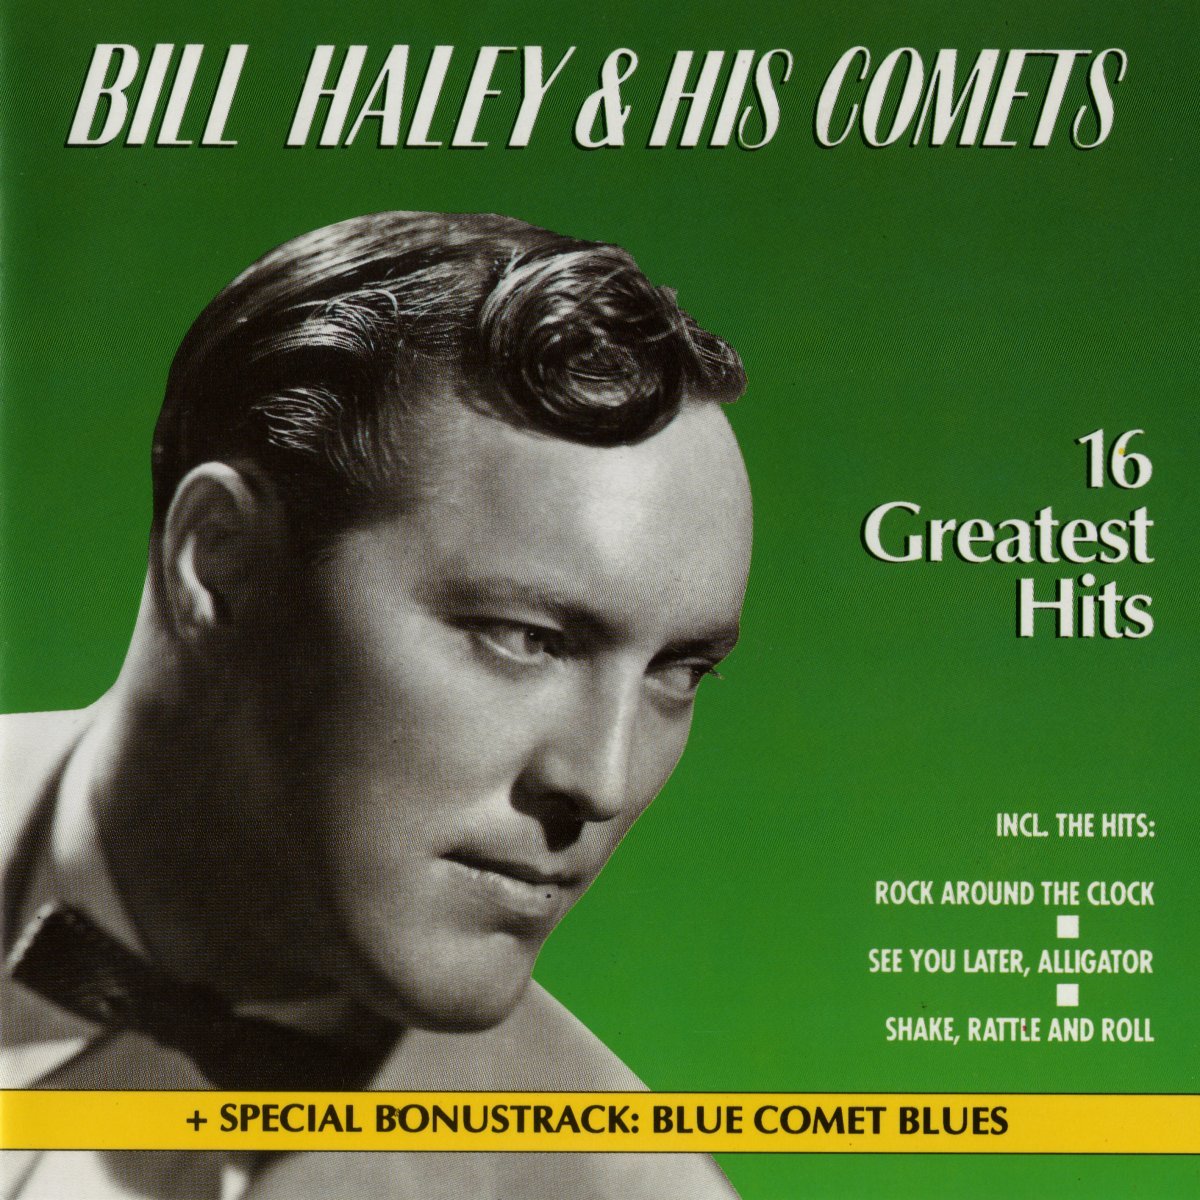 Bill Haley & His Comets - 16 Greatest Hits